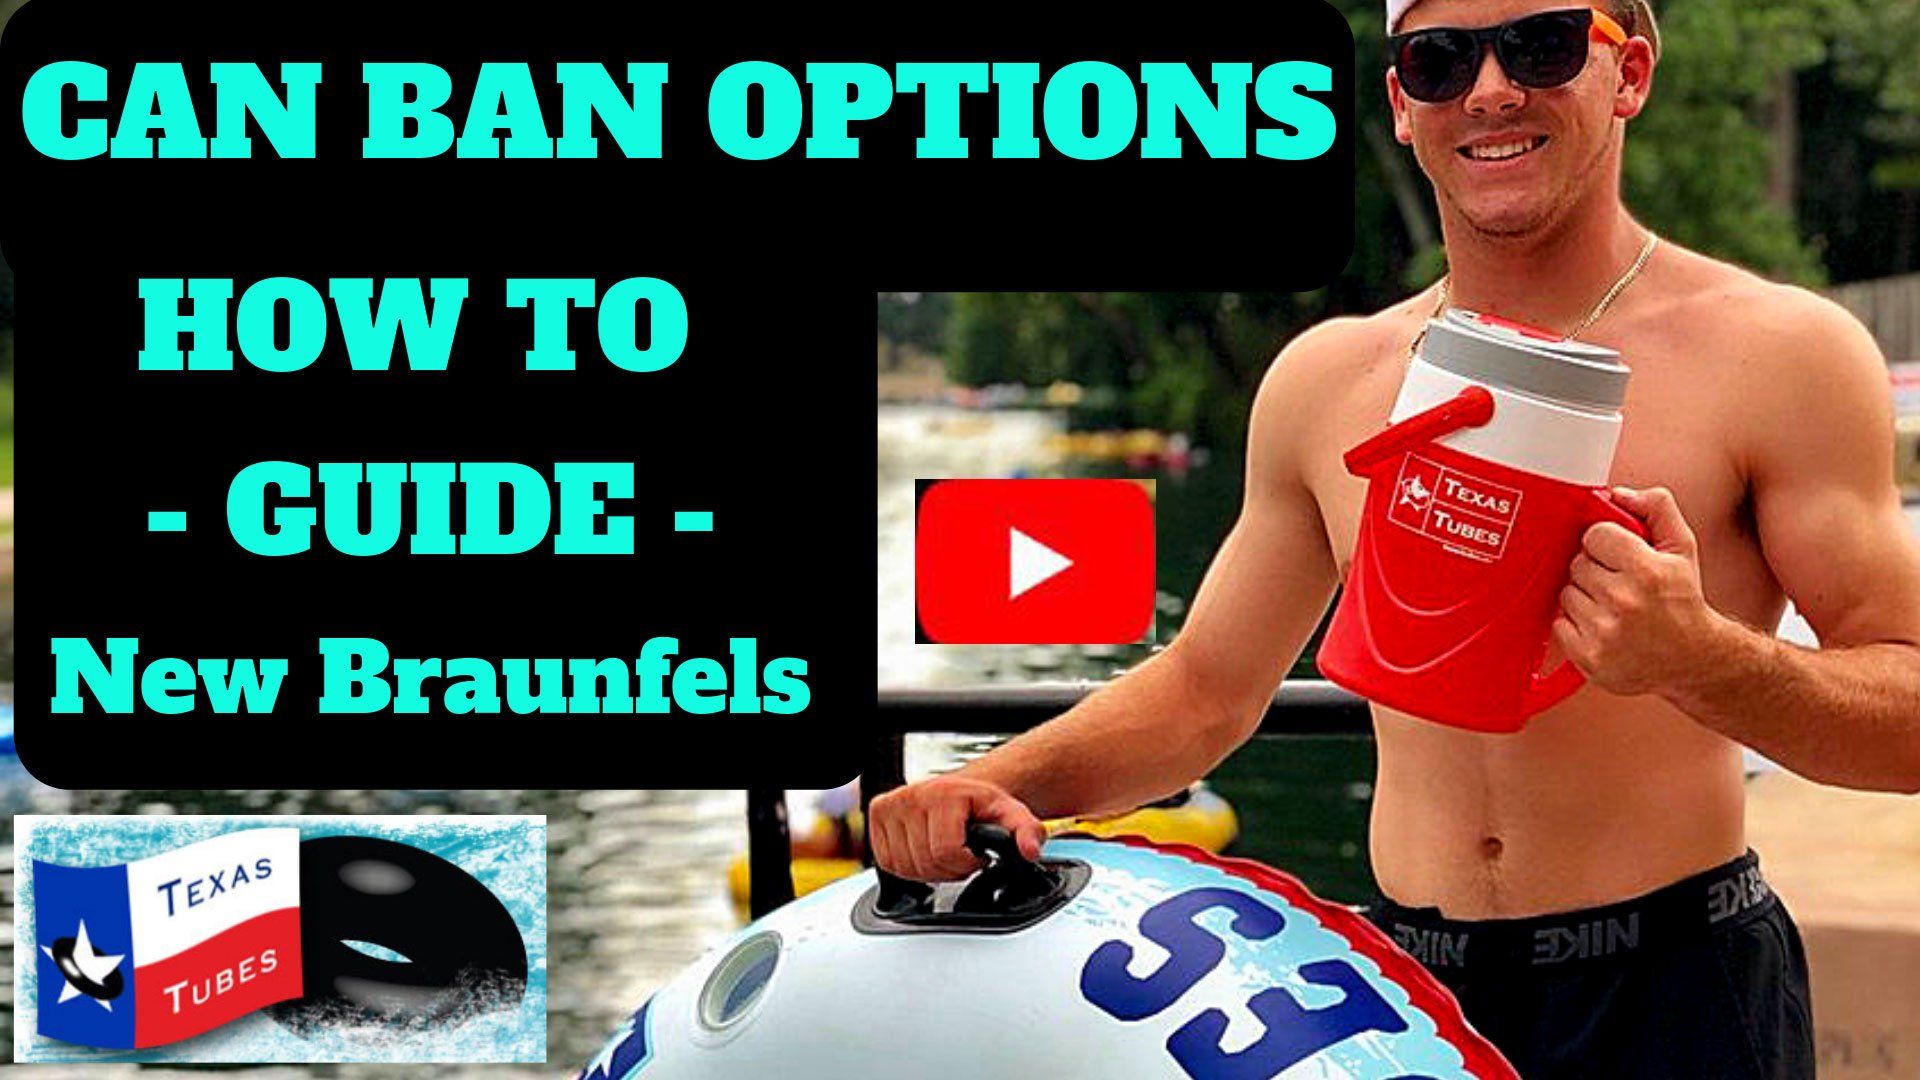 Can Ban Options - How To Guide Video - New Braunfels @ Texas Tubes